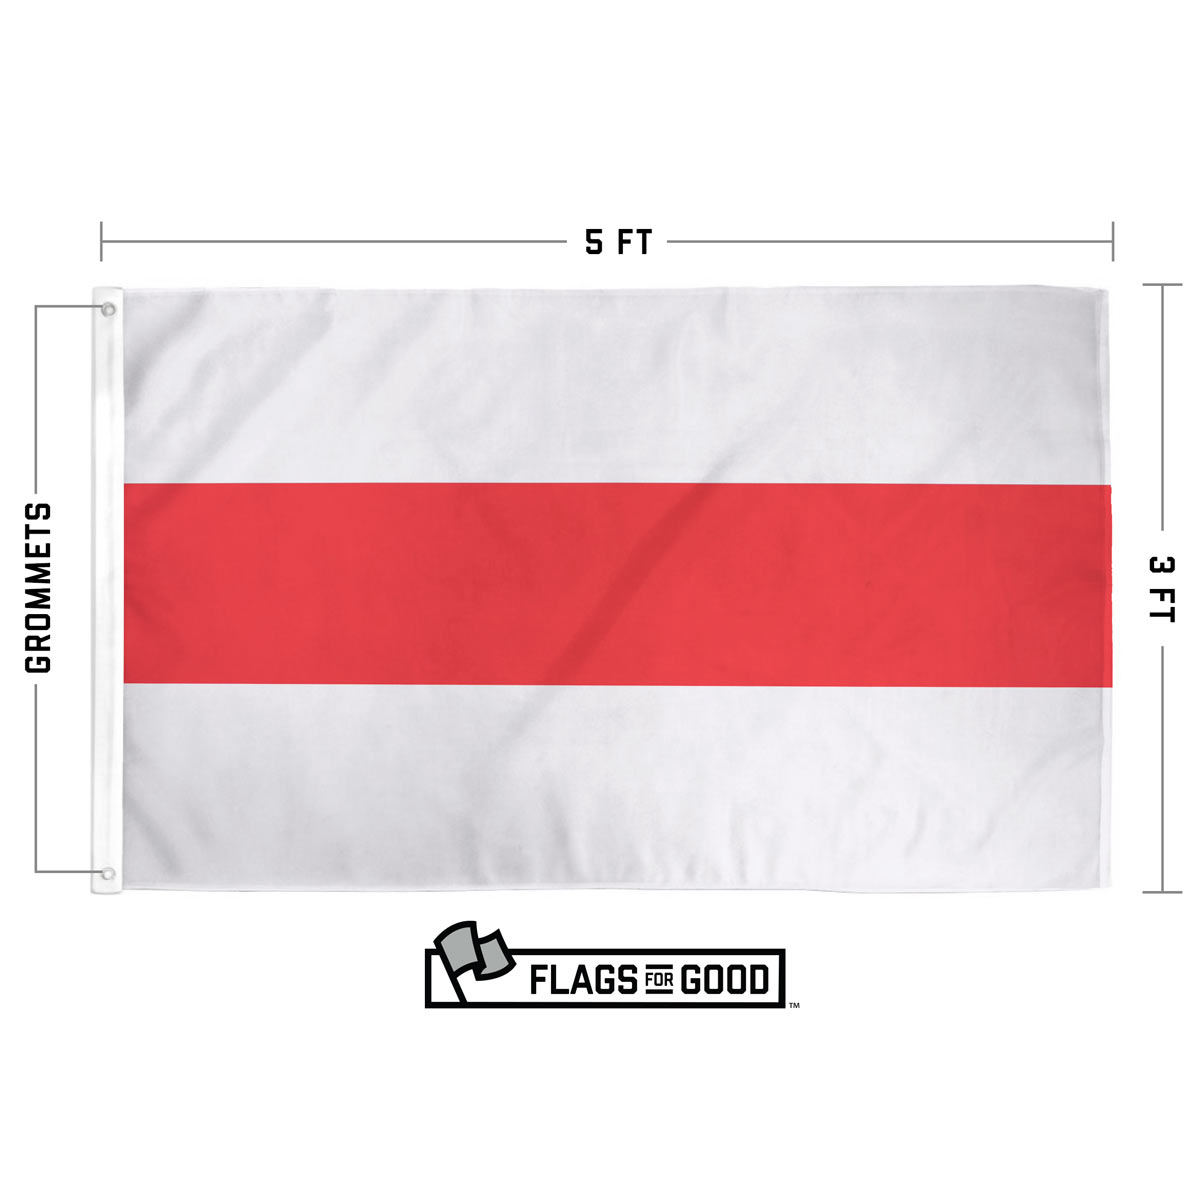 BELARUSIAN NATIONAL FLAG OF BELARUS 5 x 3 FT LARGE GREAT QUALITY POLYESTER NEW 